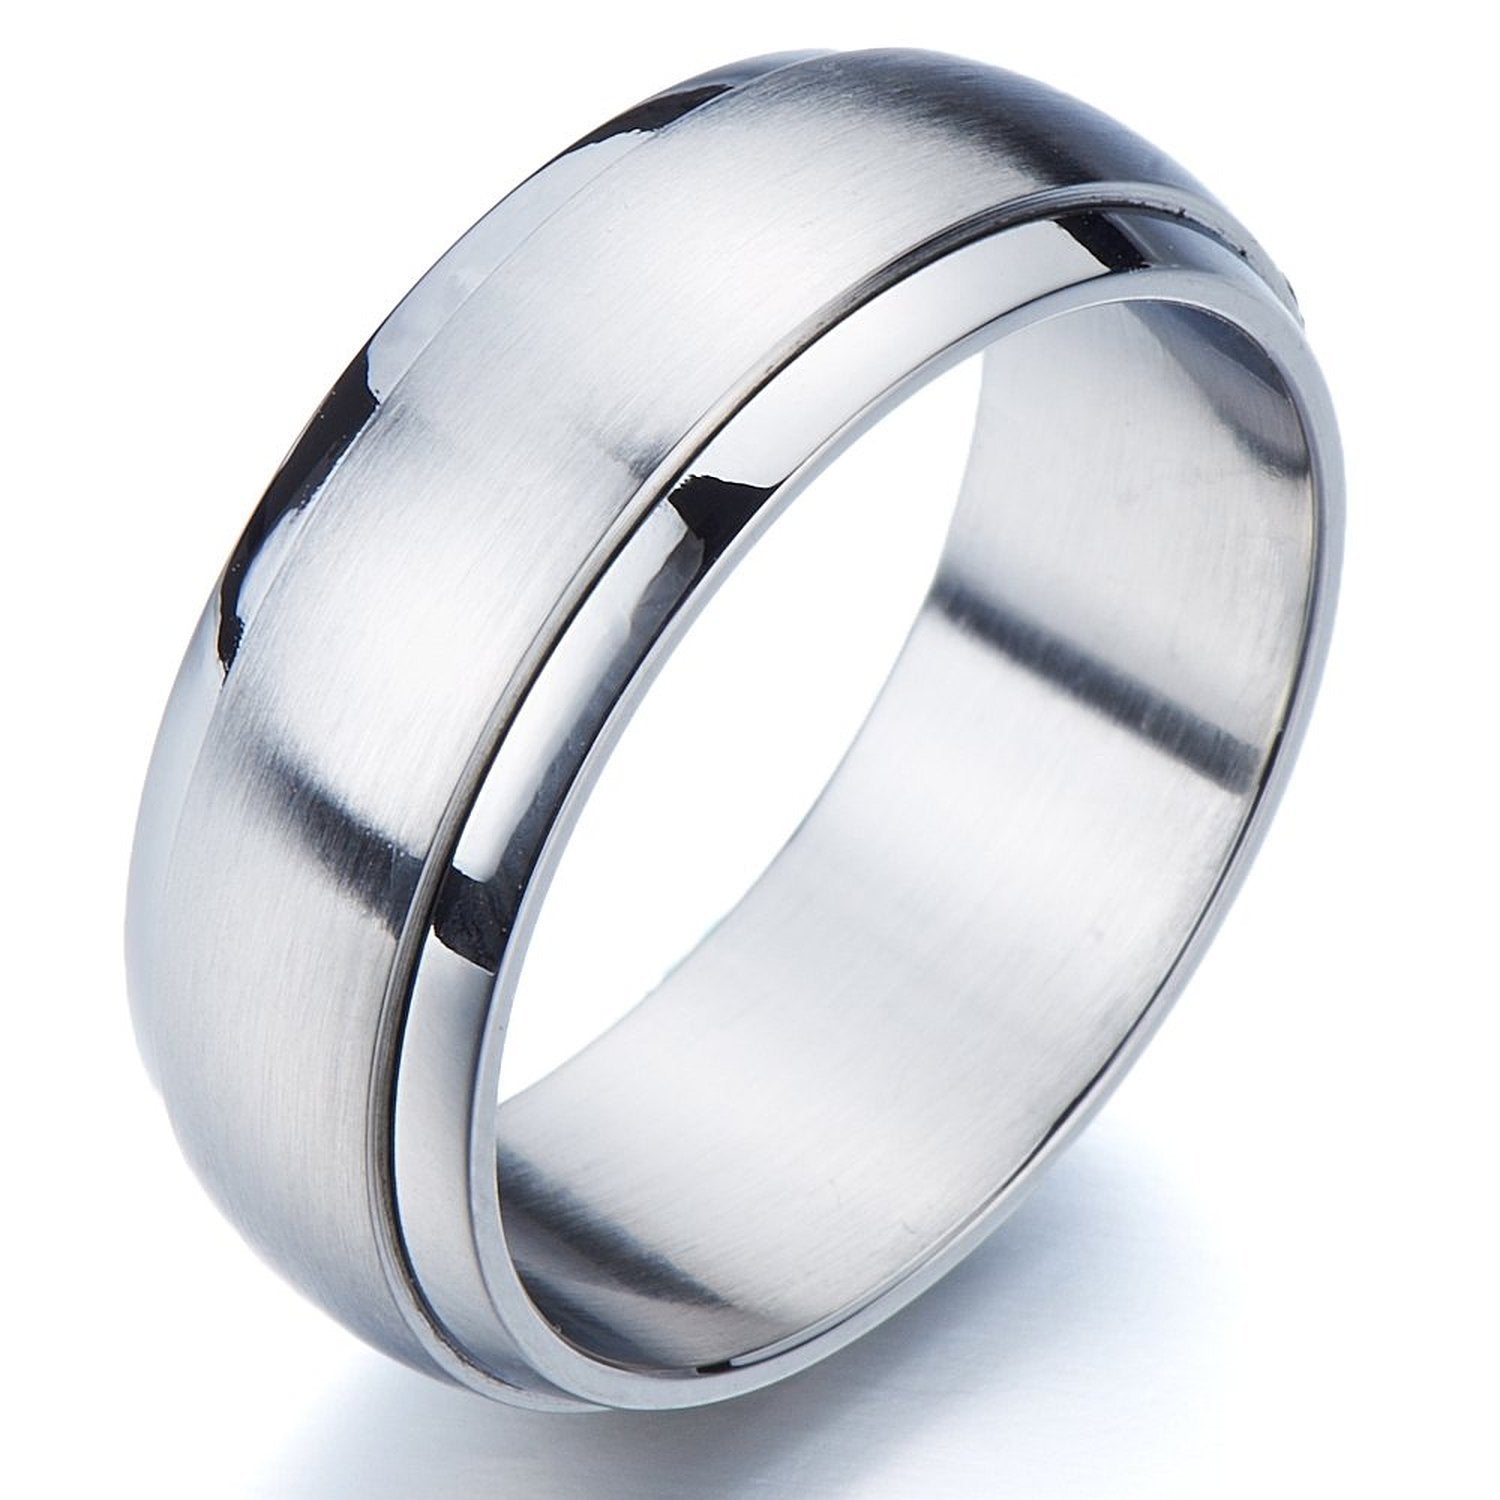 Rings Wide Brushed Center Polished Edge Stainless Steel Ring 8mm / 10 Wholesale Jewelry Website 10 Unisex